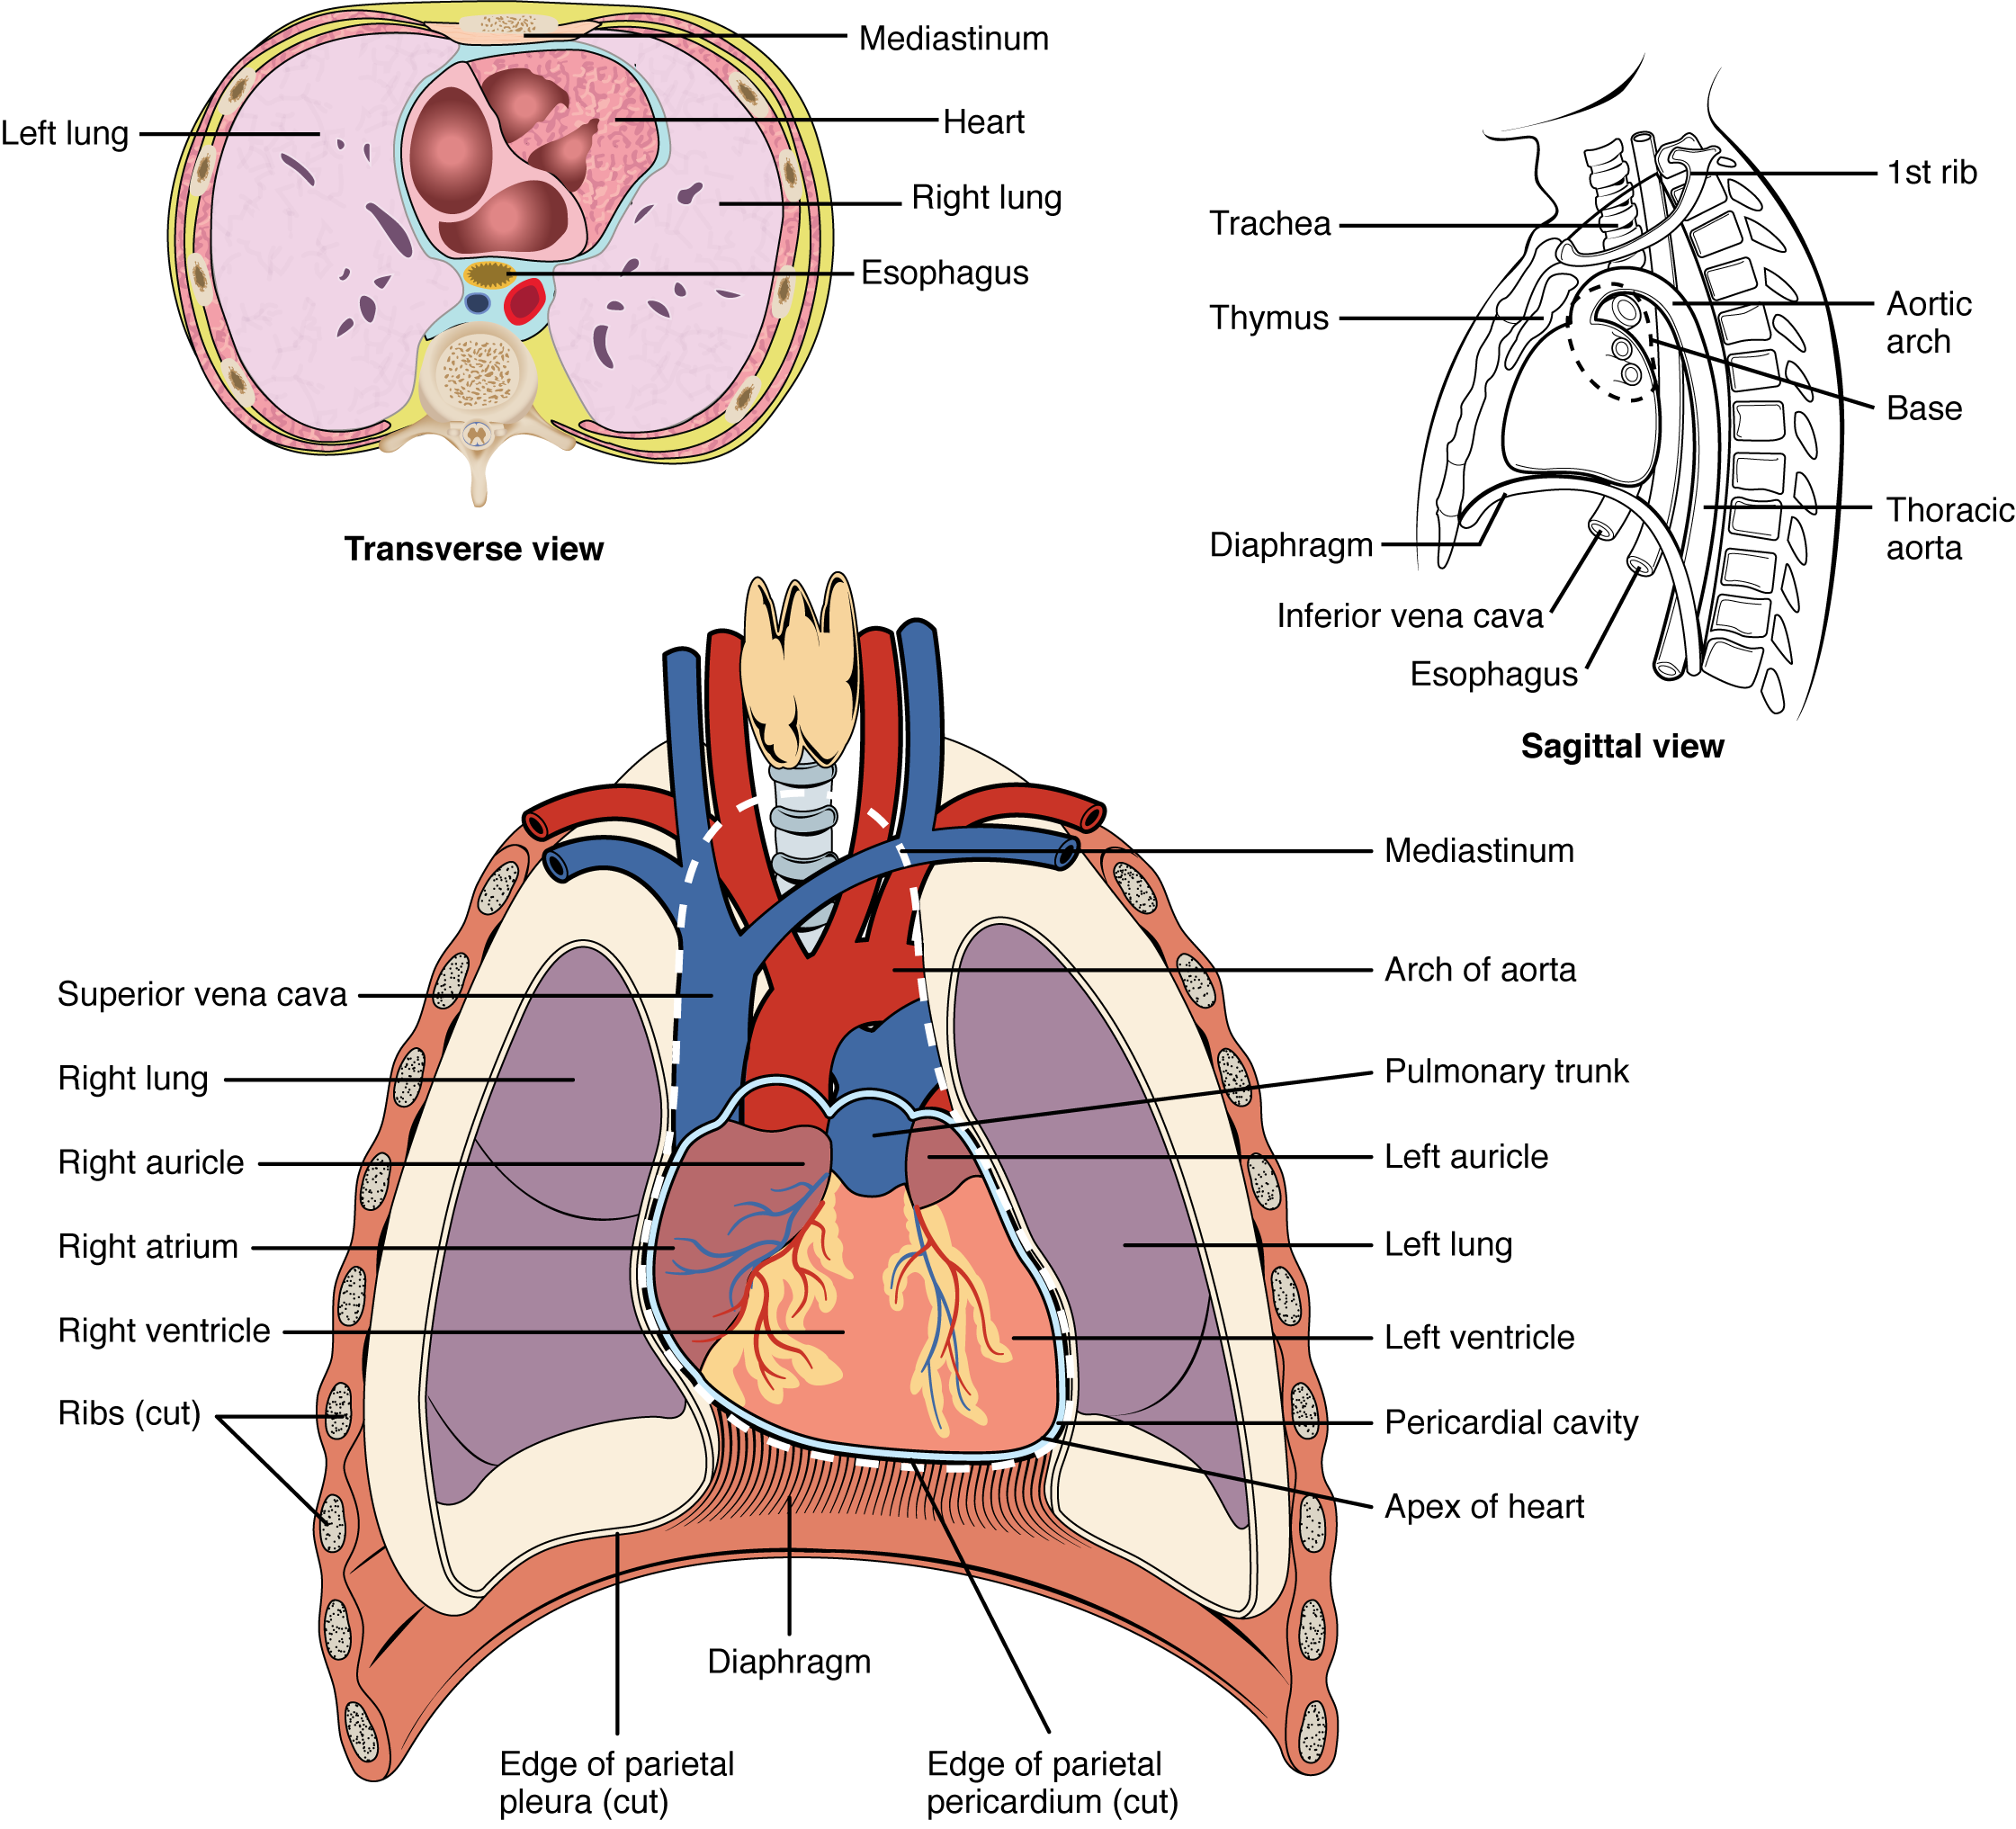 This diagram shows the location of the heart in the thorax.